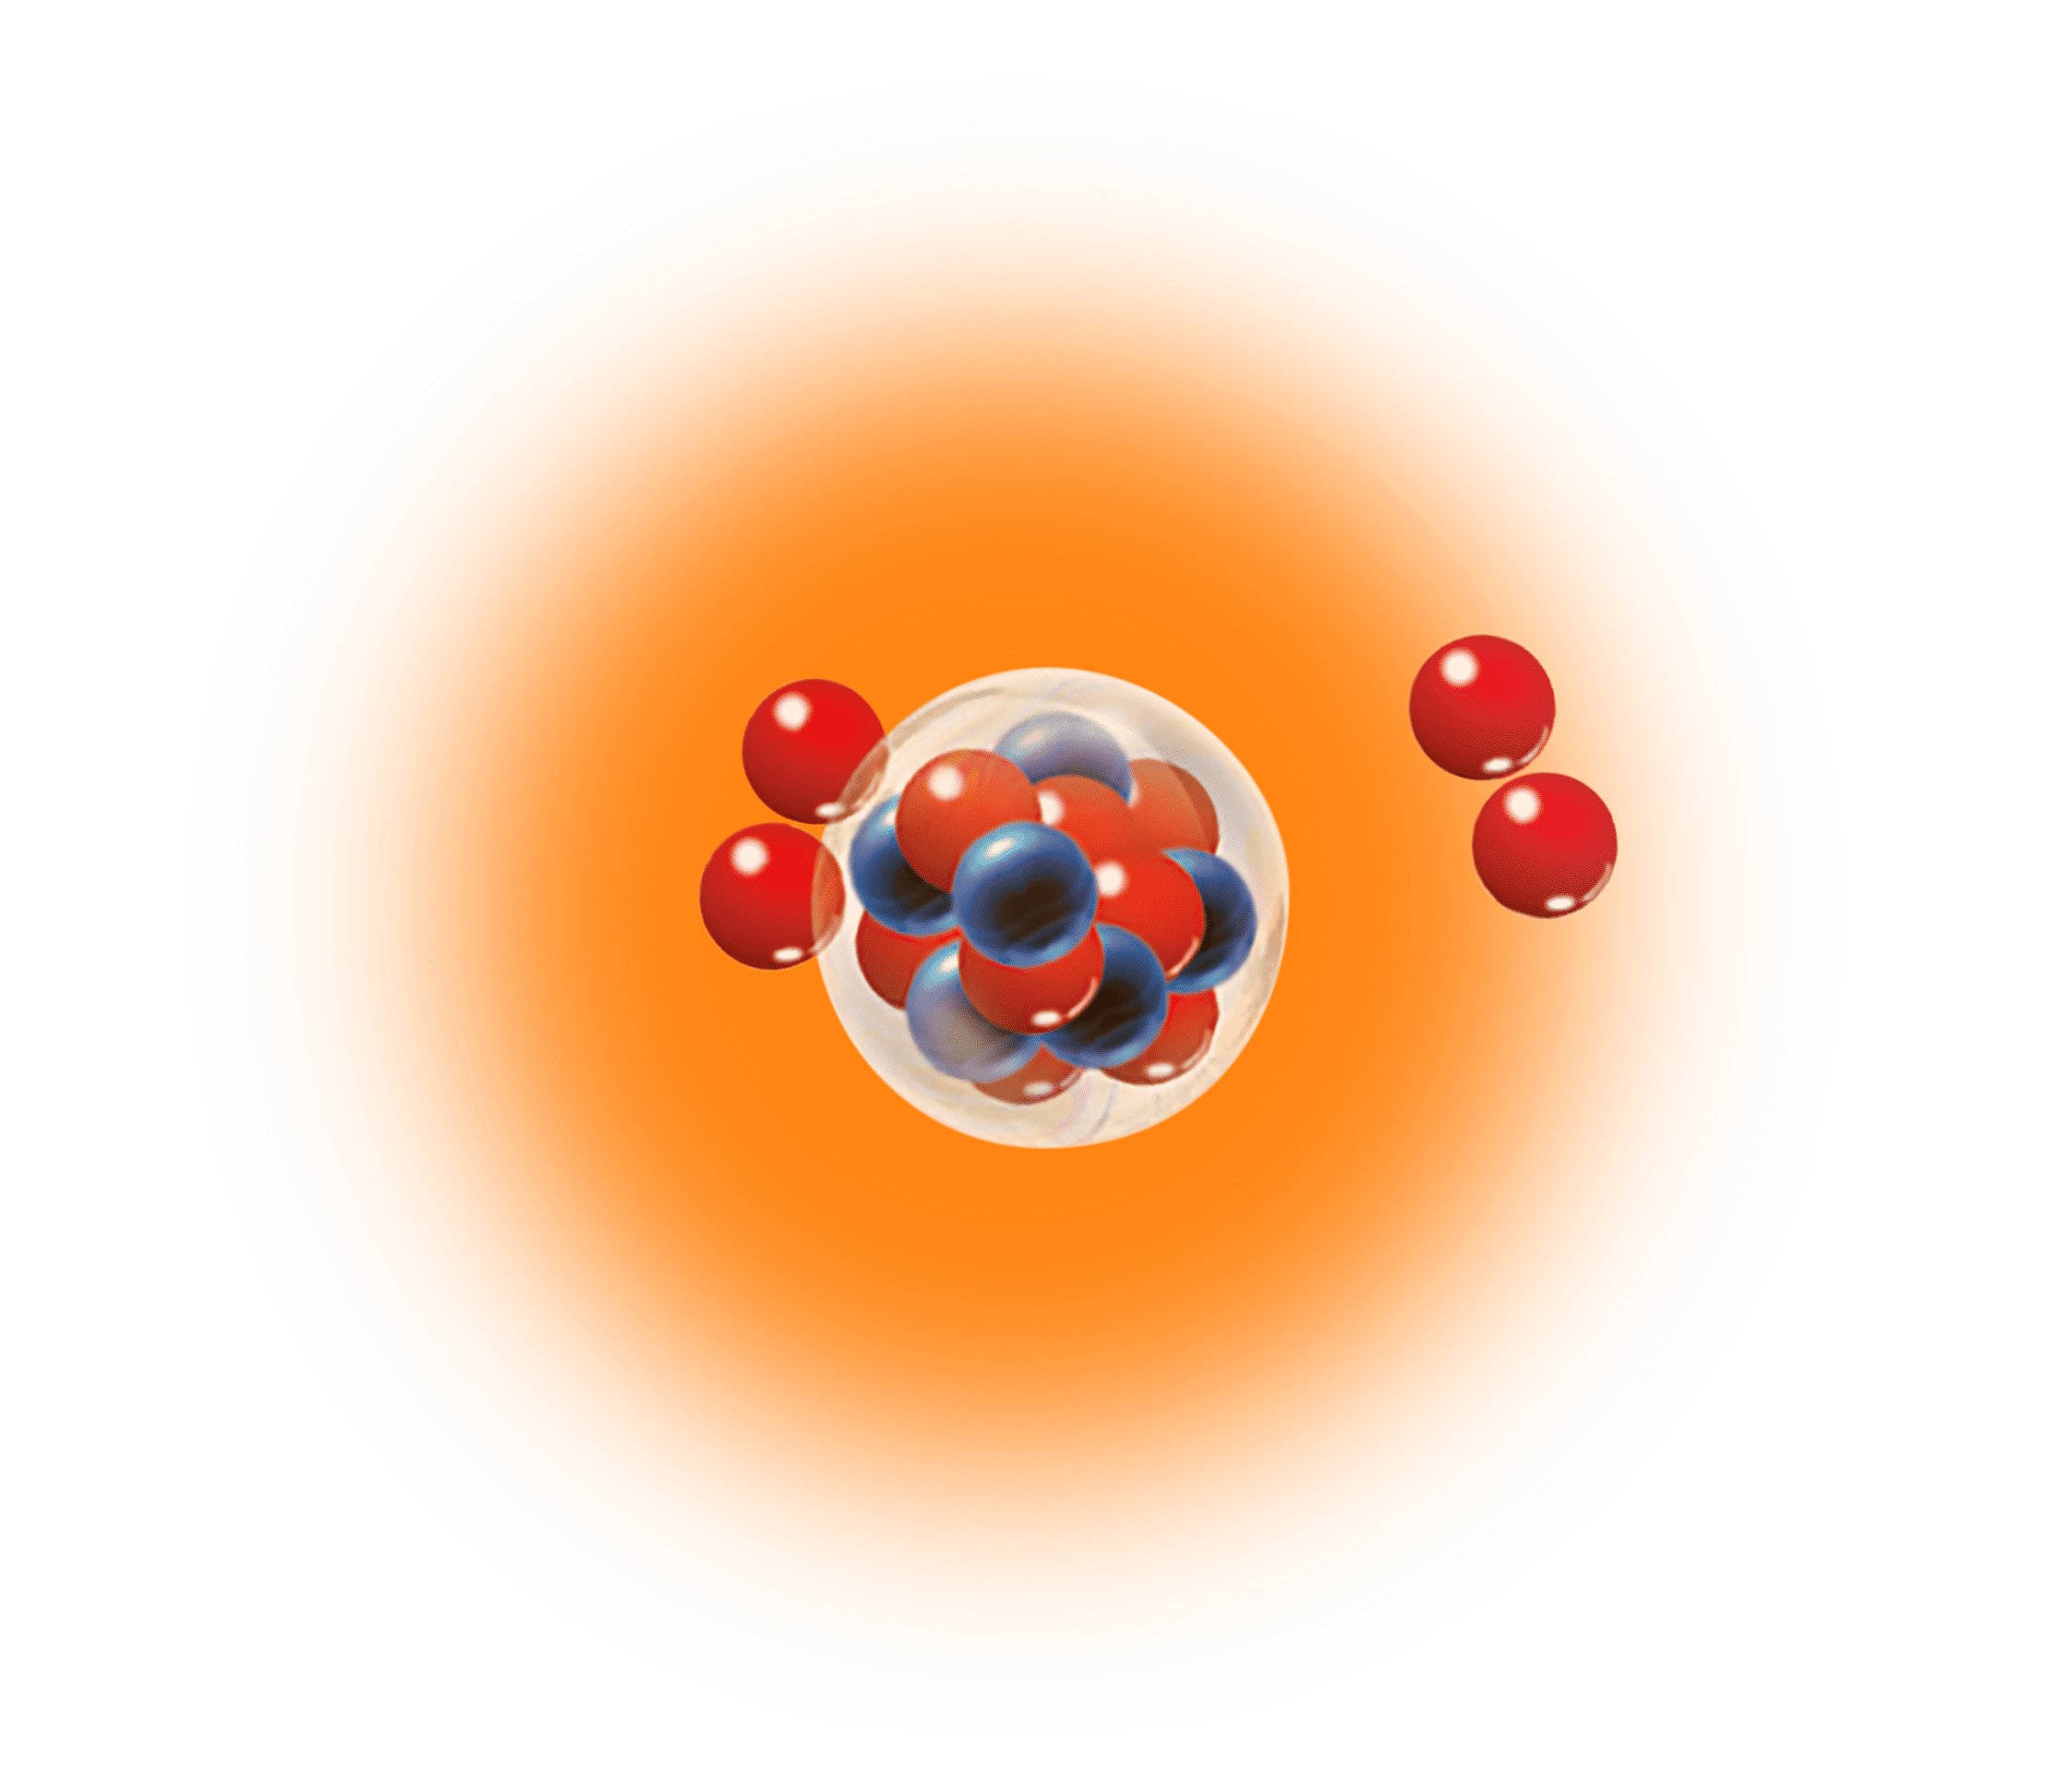 An illustration of magnesium-18 with 12 red orbs representing protons and six blue orbs representing neutrons.